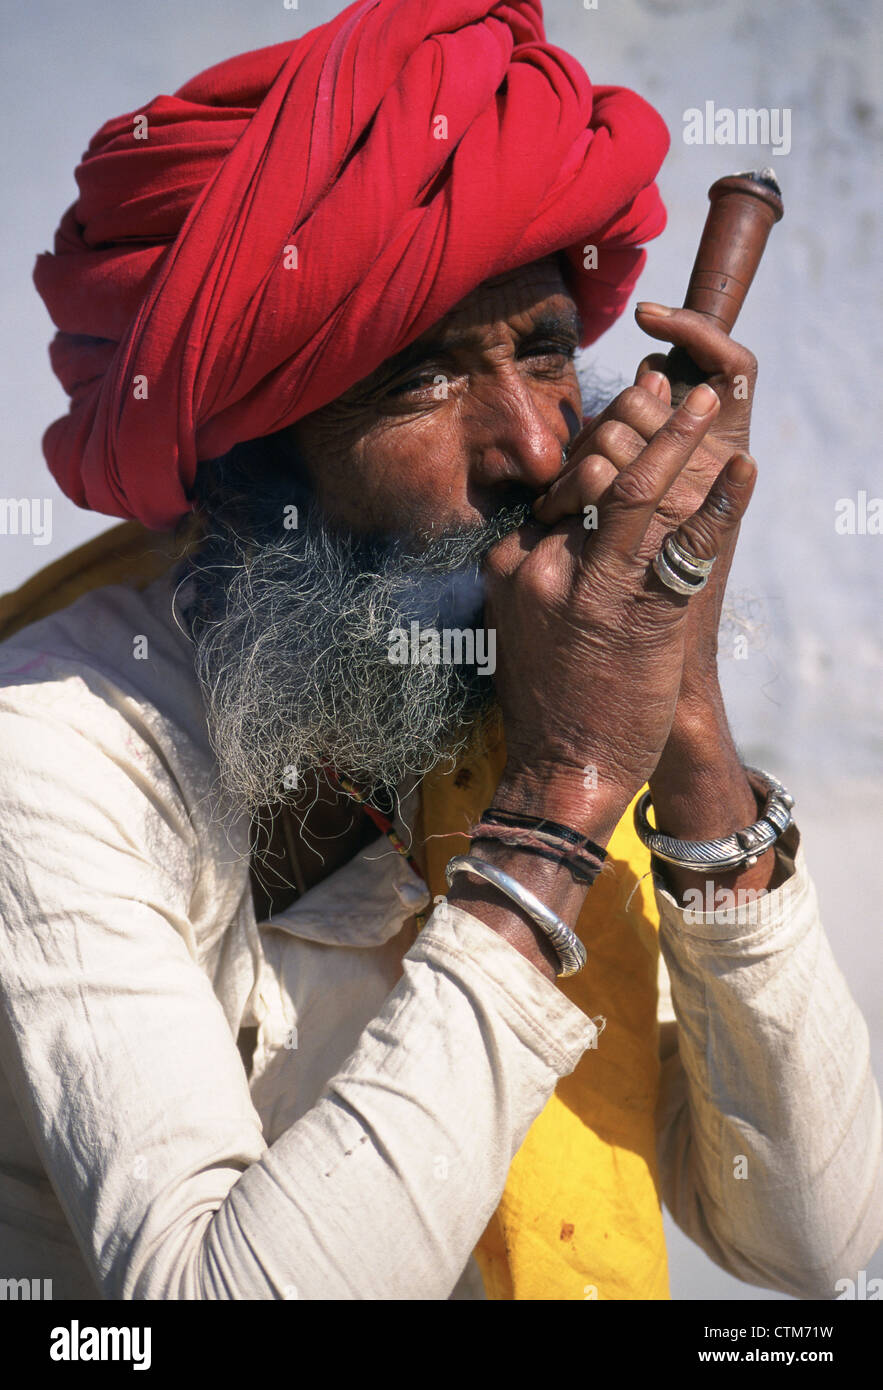 Indian man traditionally dressed smoking opium with his pipe. Stock Photo